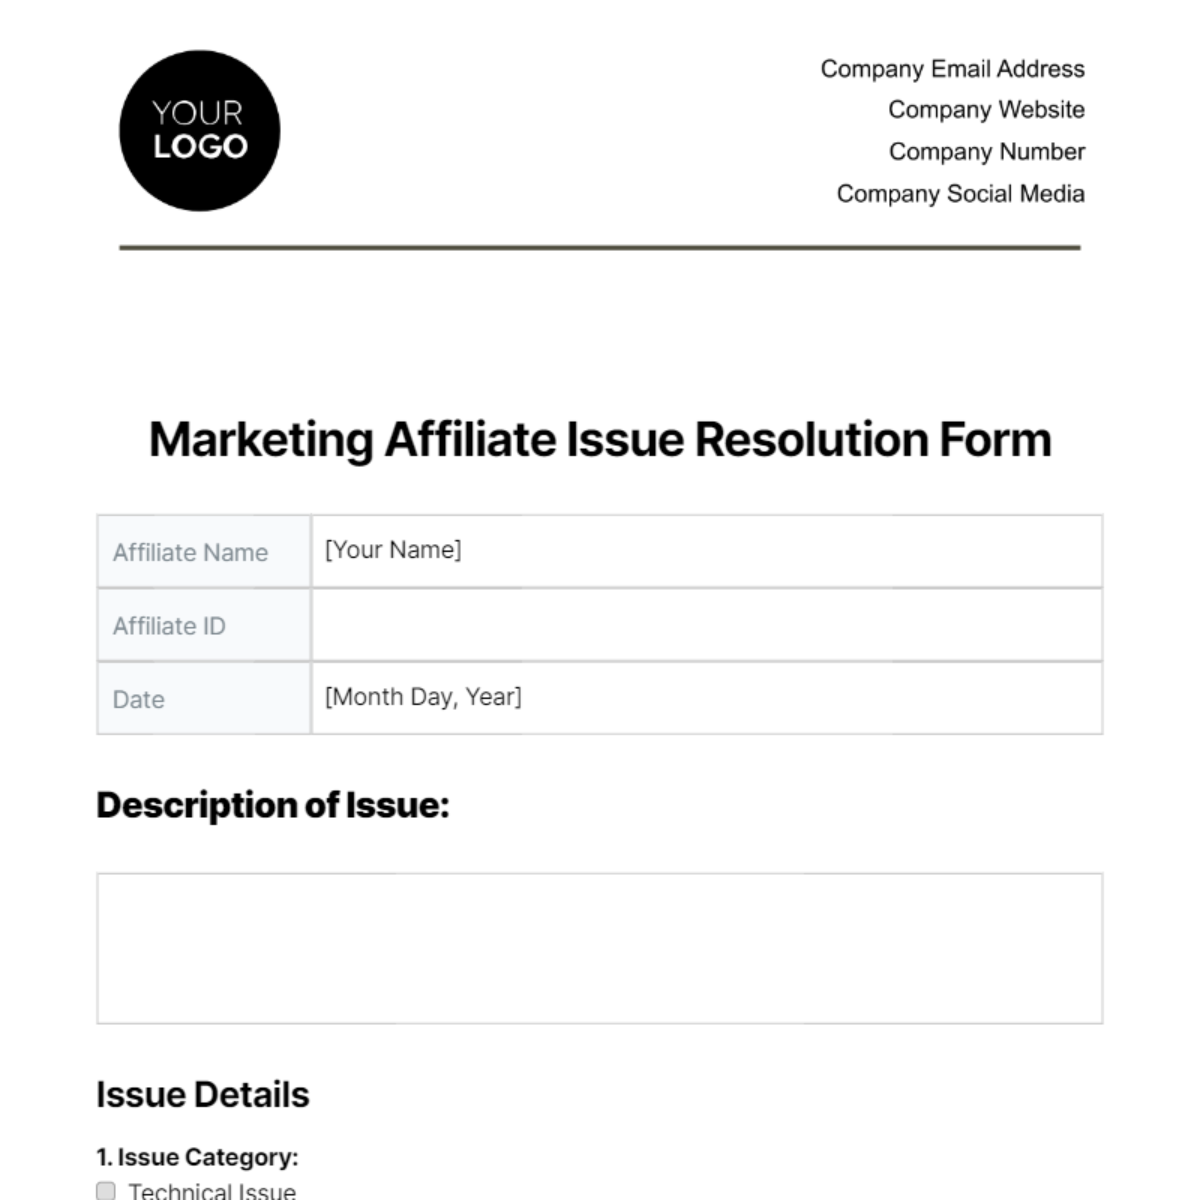 Marketing Affiliate Issue Resolution Form Template